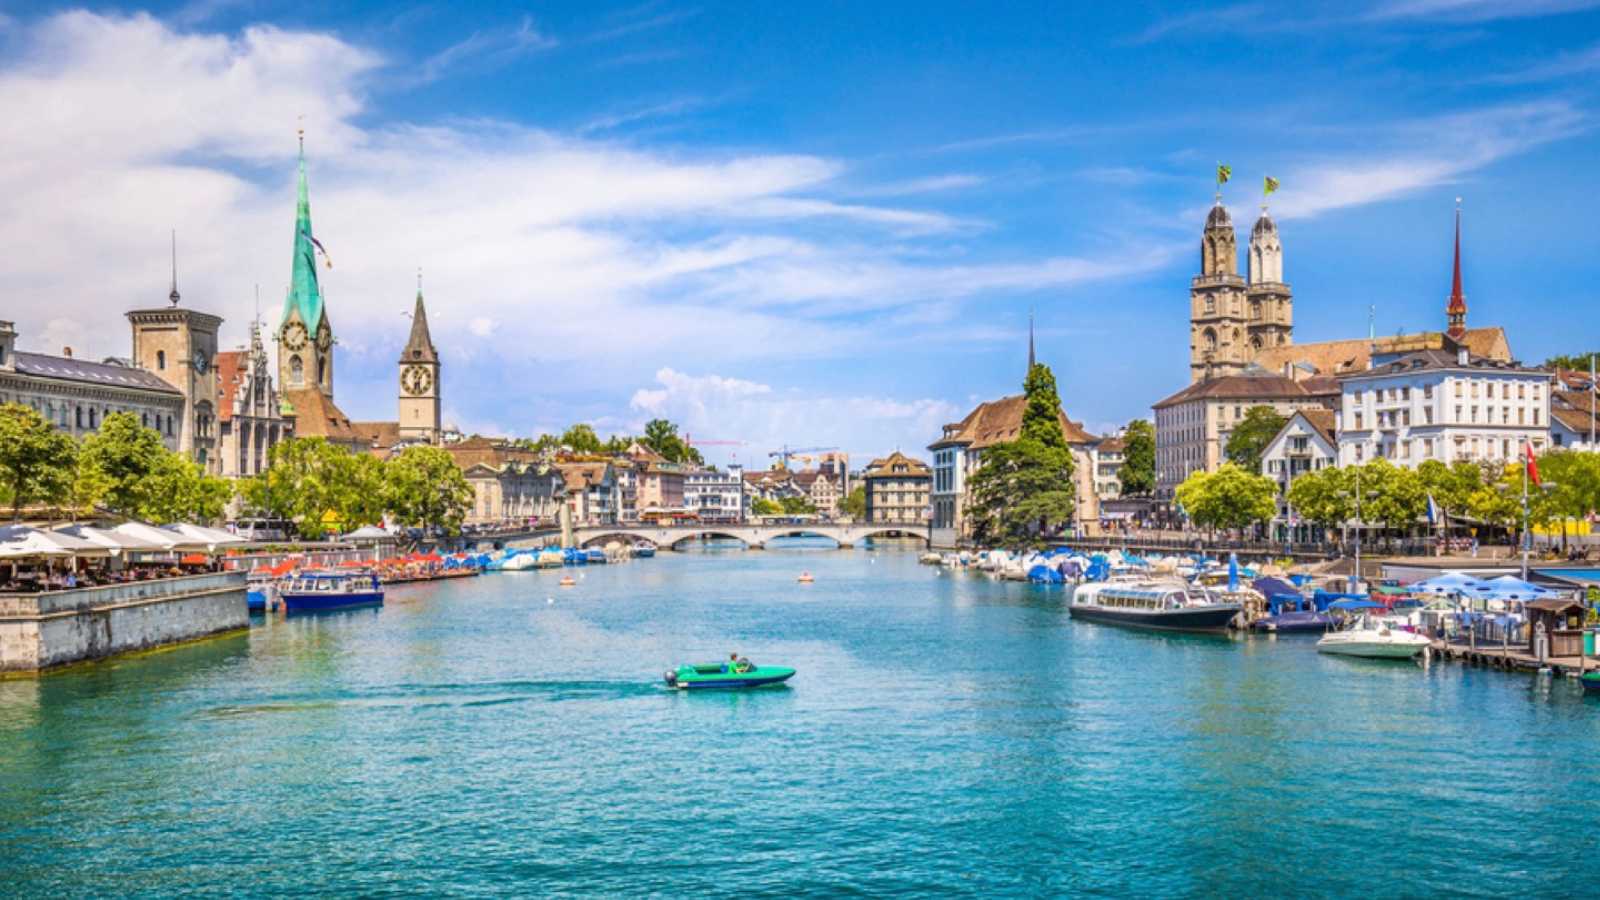 <p>Switzerland is renowned for being a very peaceful place in many respects, and it has very low crime rates too. It's consistently been ranked one of the safest countries in the world, and since it also has excellent and reliable infrastructure, it's a great travel destination for female solo travelers.</p>